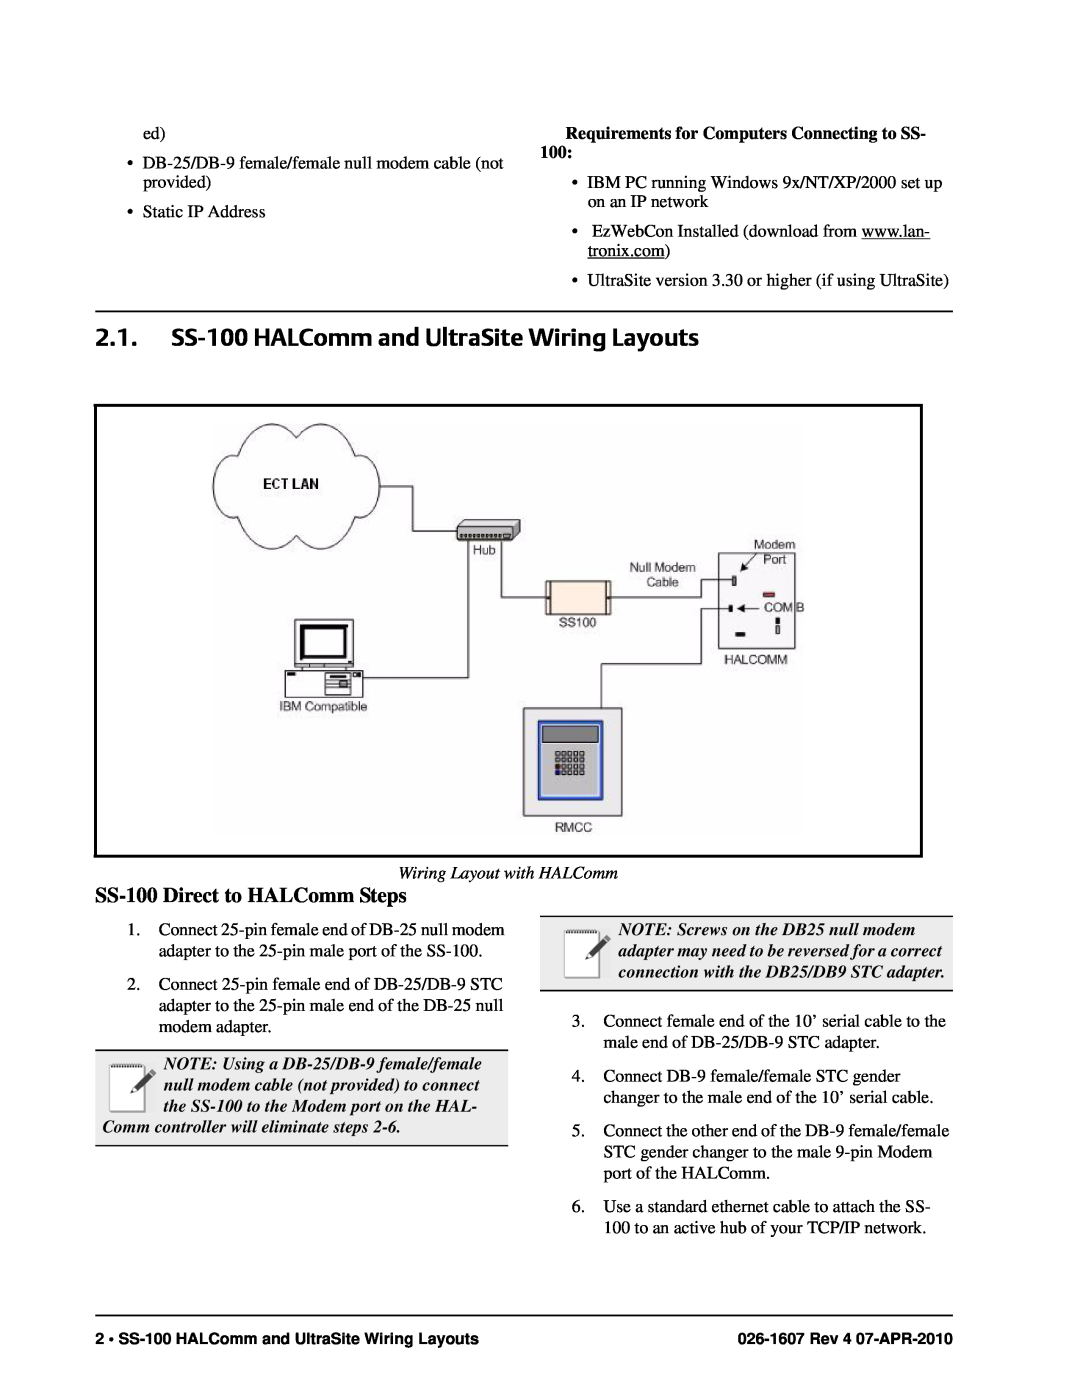 Emerson manual SS-100 HALComm and UltraSite Wiring Layouts, SS-100 Direct to HALComm Steps, Wiring Layout with HALComm 